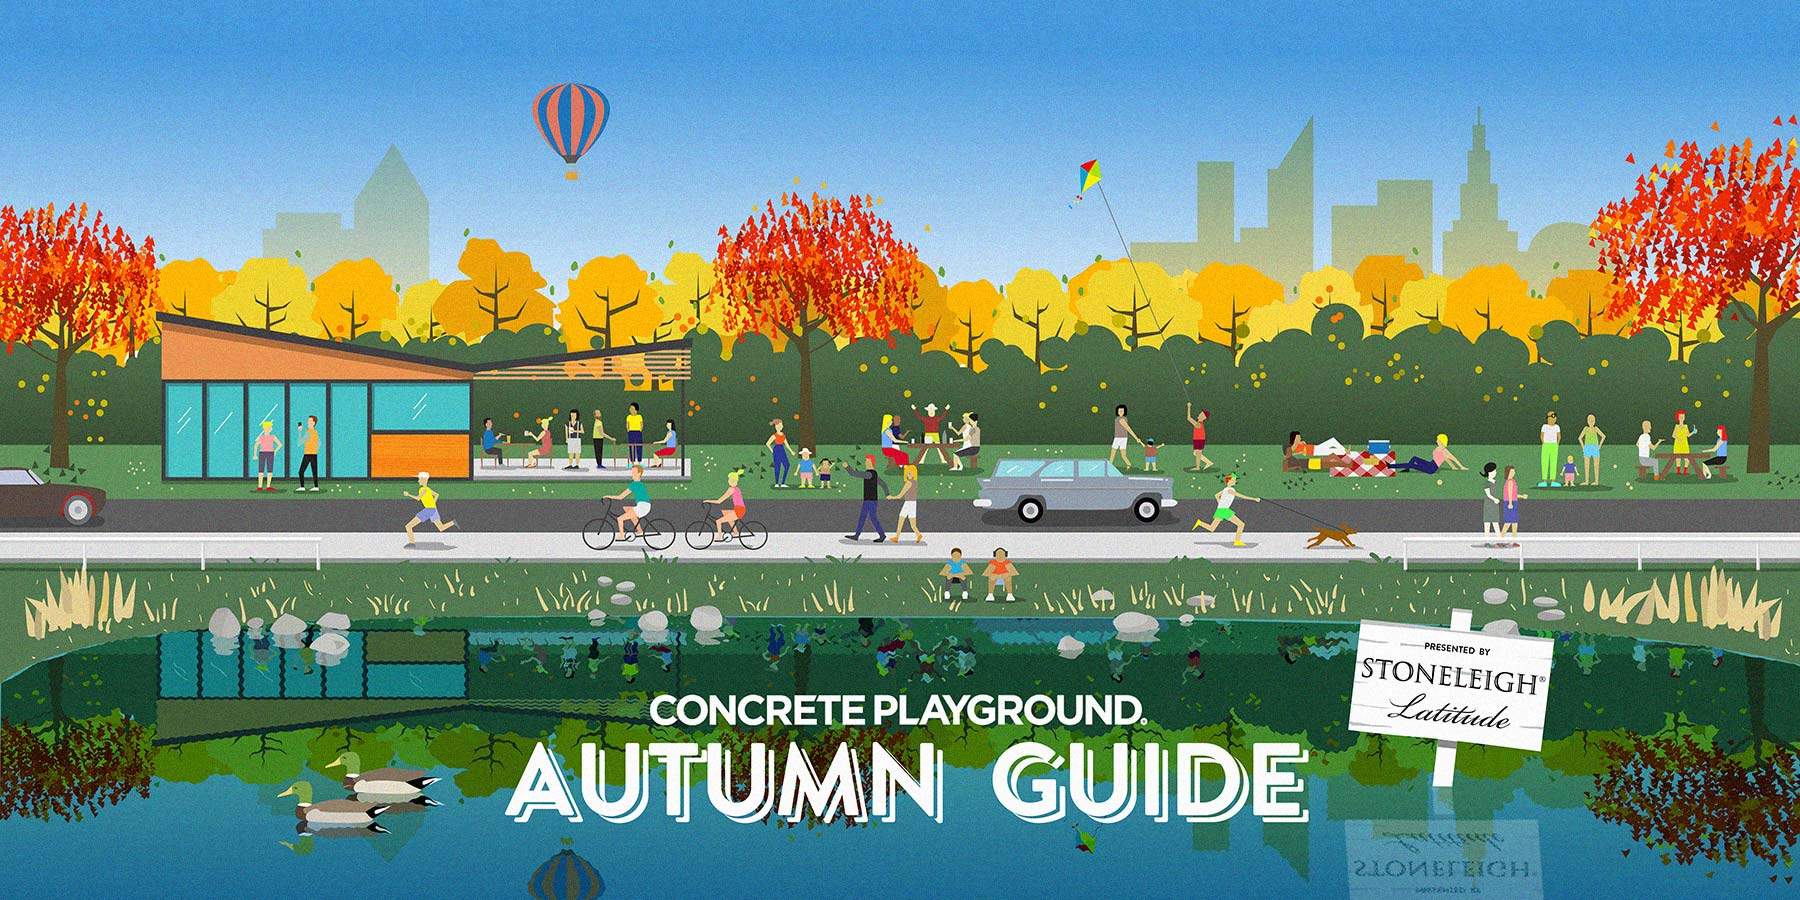 The Autumn Guide